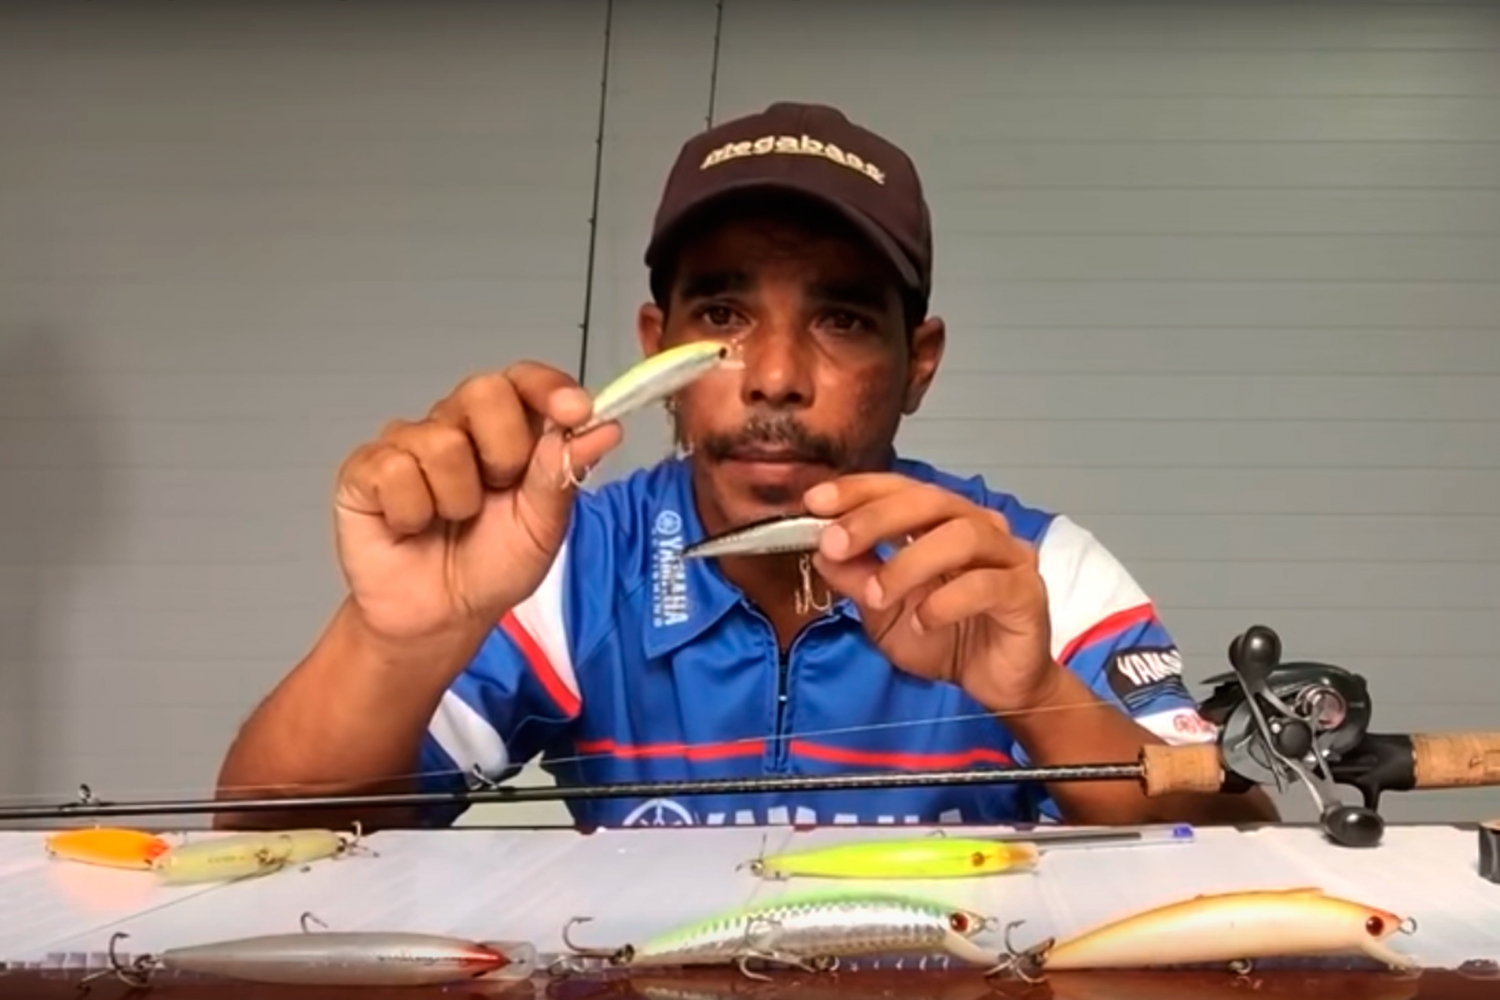 Tips for the Magic Stick and BorÃ¡ by Dany Hereng - Dany Hereng professional fisherman and guide at Bertioga, talks about his everyday lures.